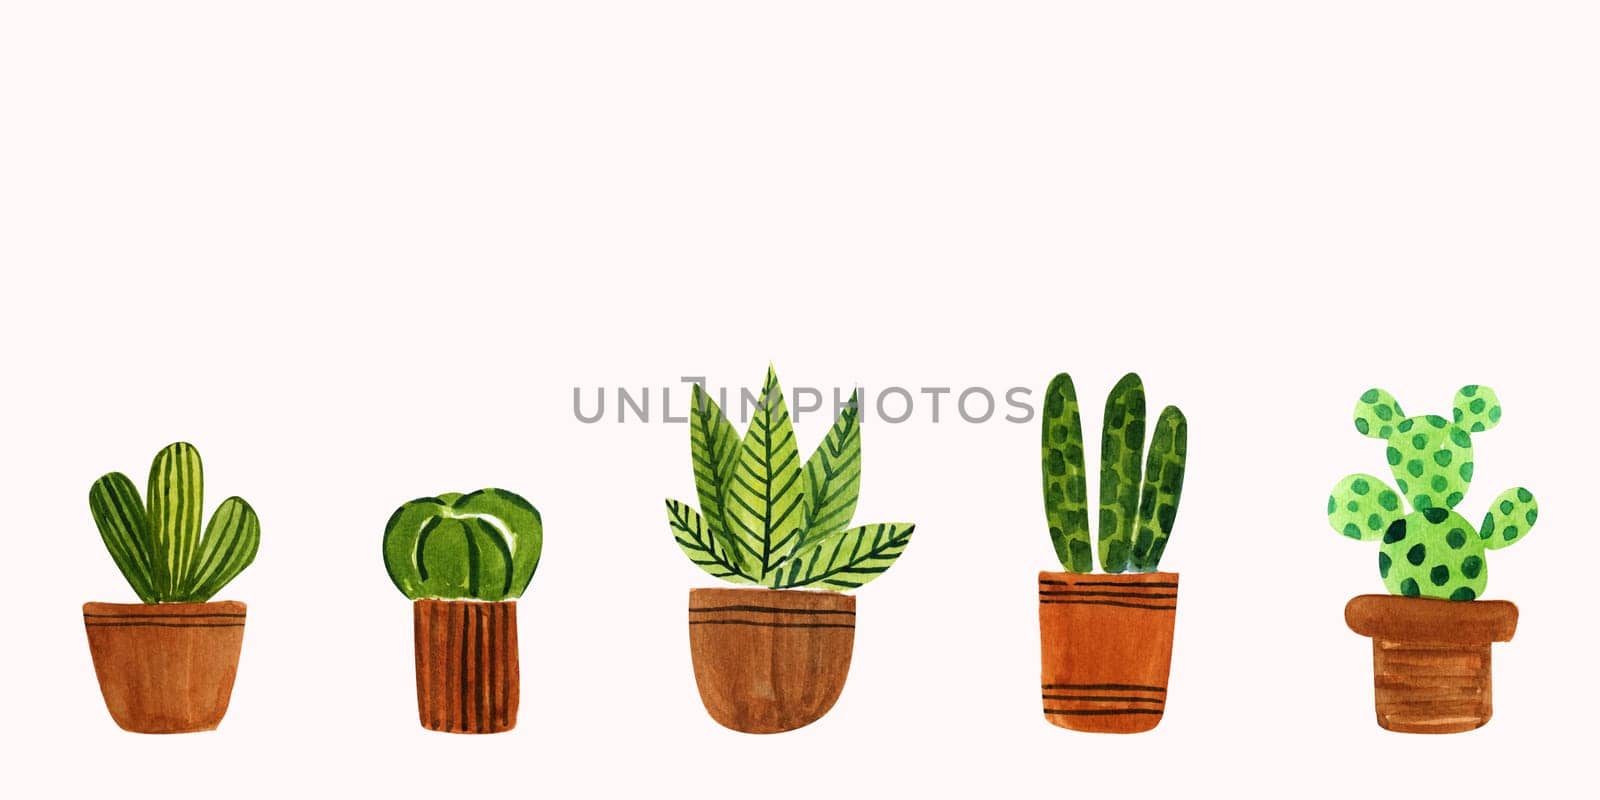 Set of watercolor elements decorative houseplants in pots. Comfort at home. Decorative stickers. Notebook covers. Patterns and prints.